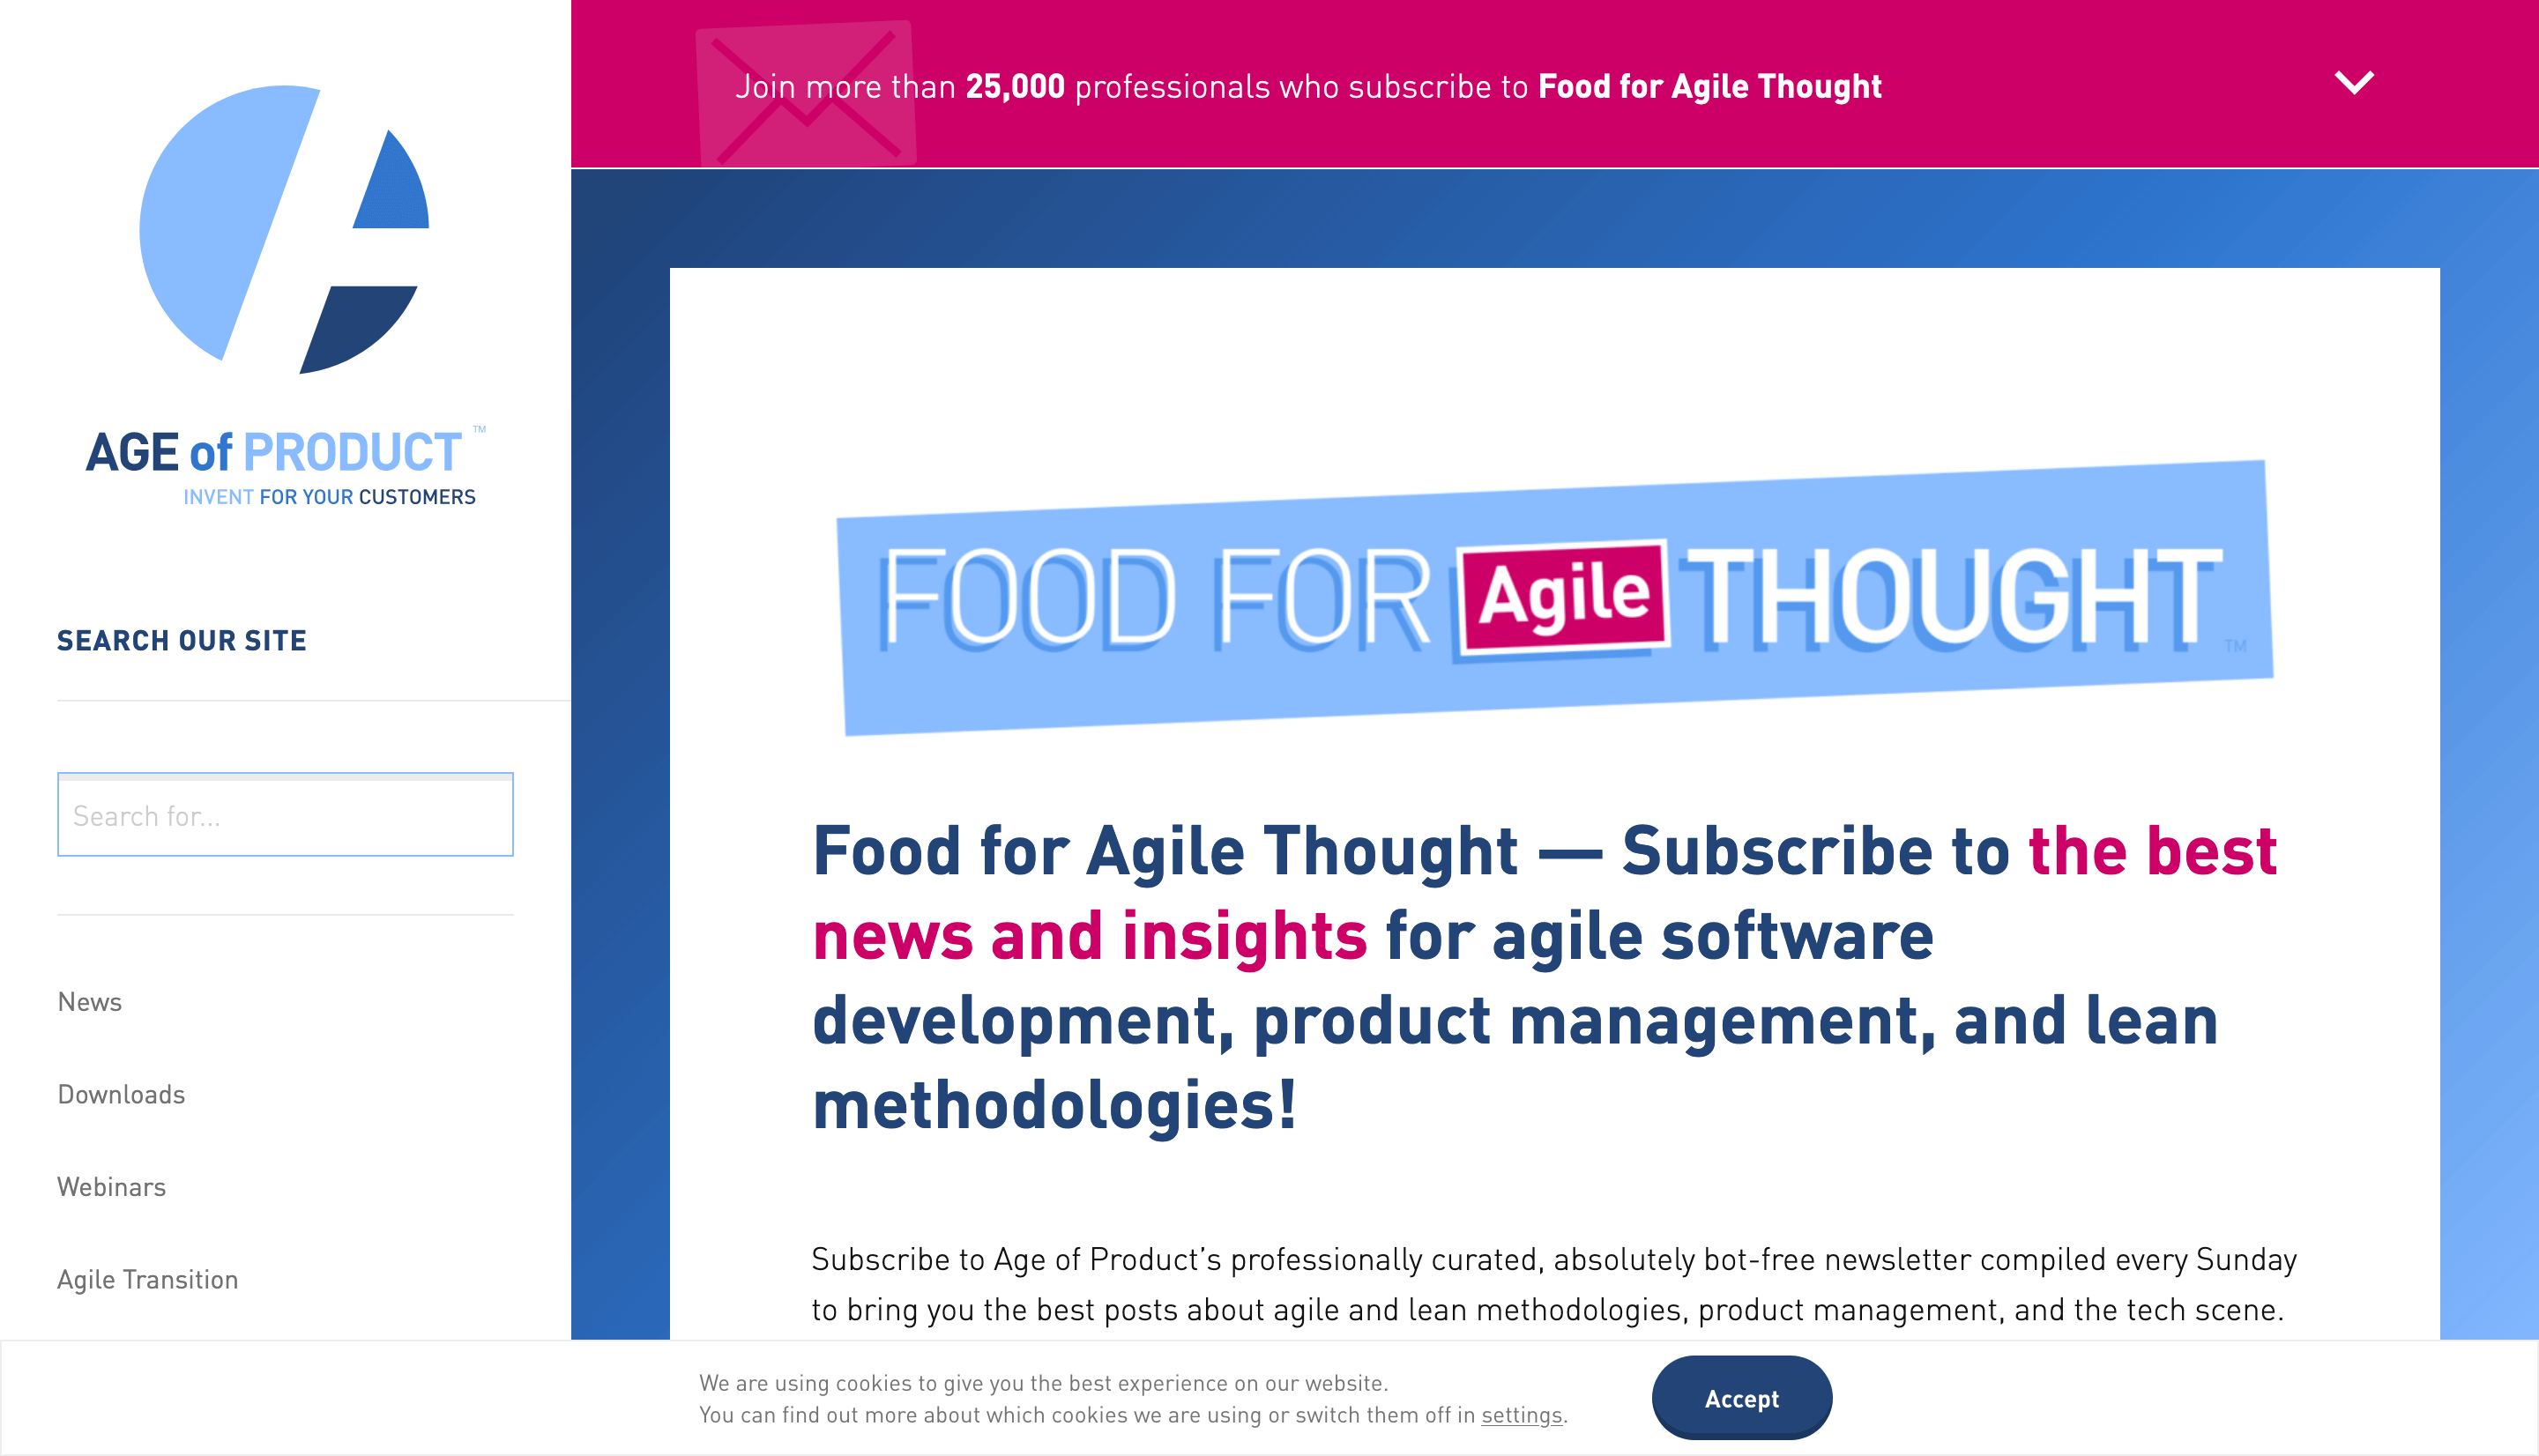 Food for Agile Thought homepage